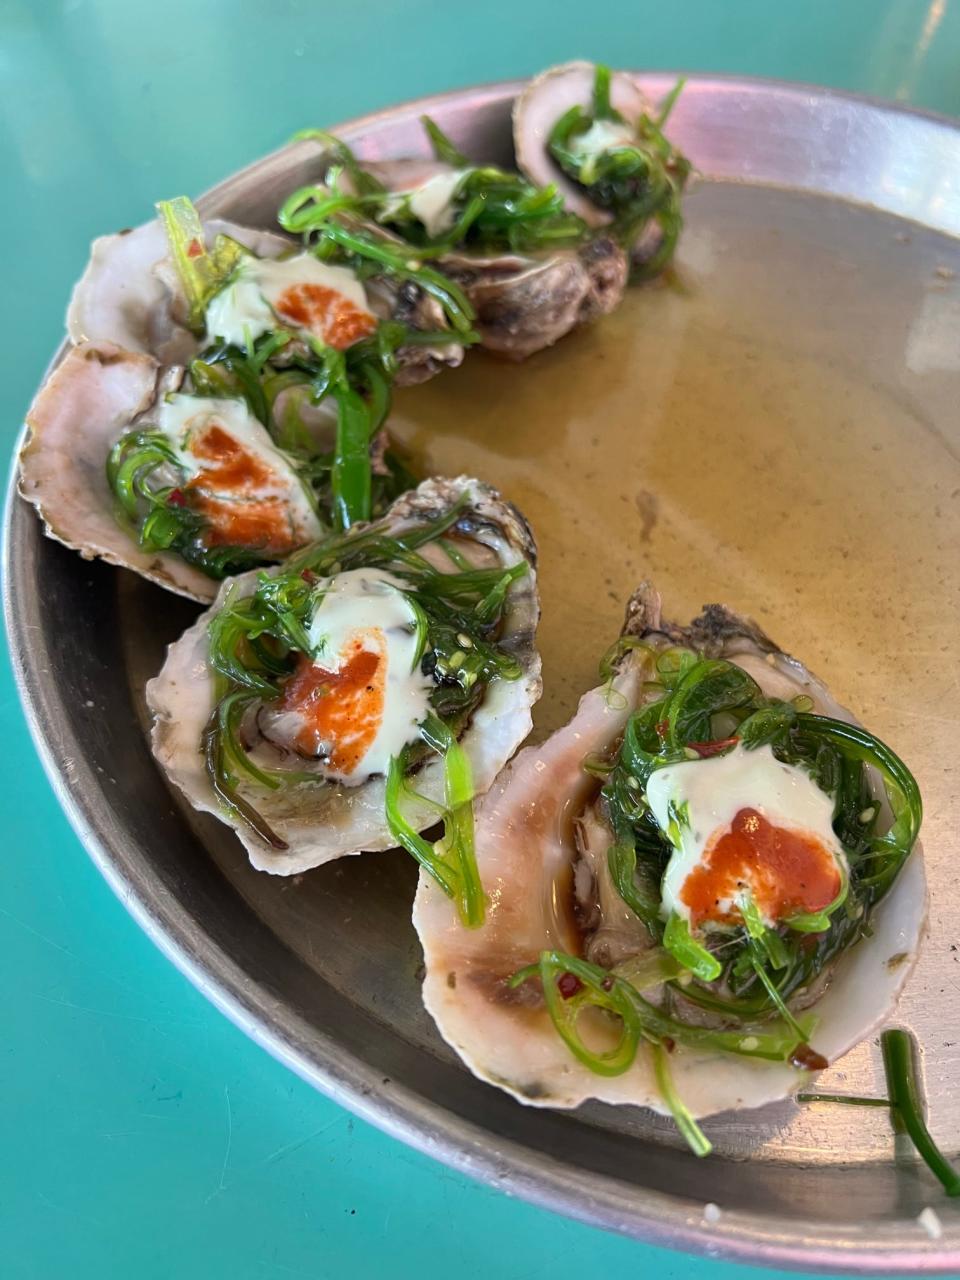 We tried the specialty "Godzilla" oysters. Raw oysters are topped with tangy seaweed salad, cucumber wasabi and spicy "pirate" sauce.